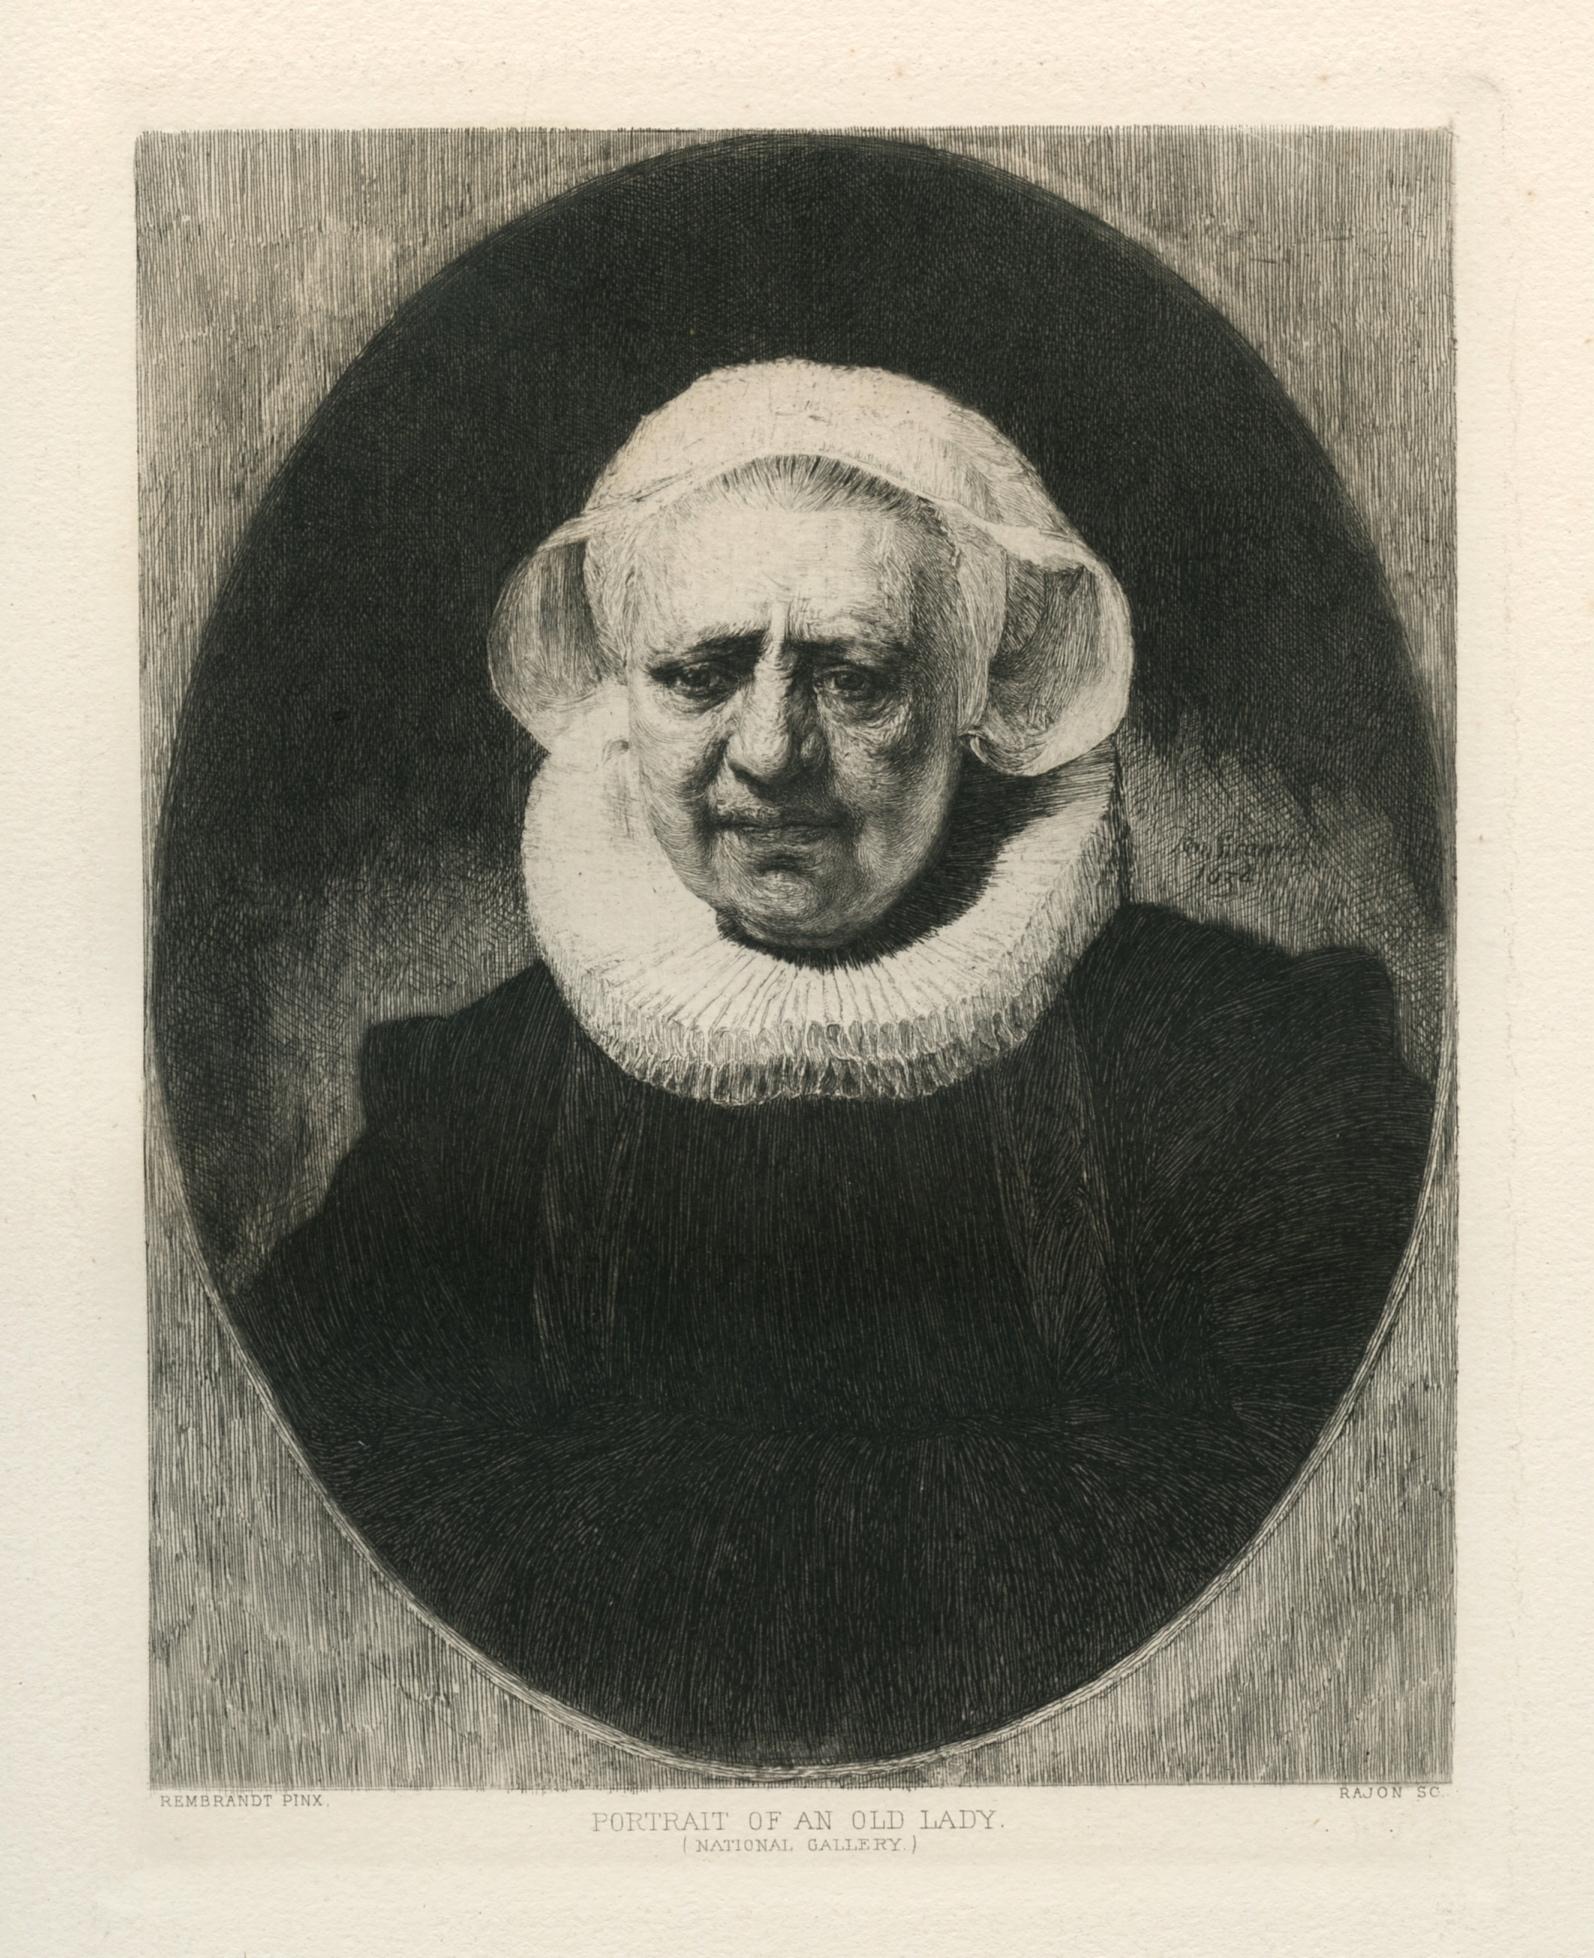 "Portrait of an Old Lady" etching - Print by (After) Rembrandt van Rijn 